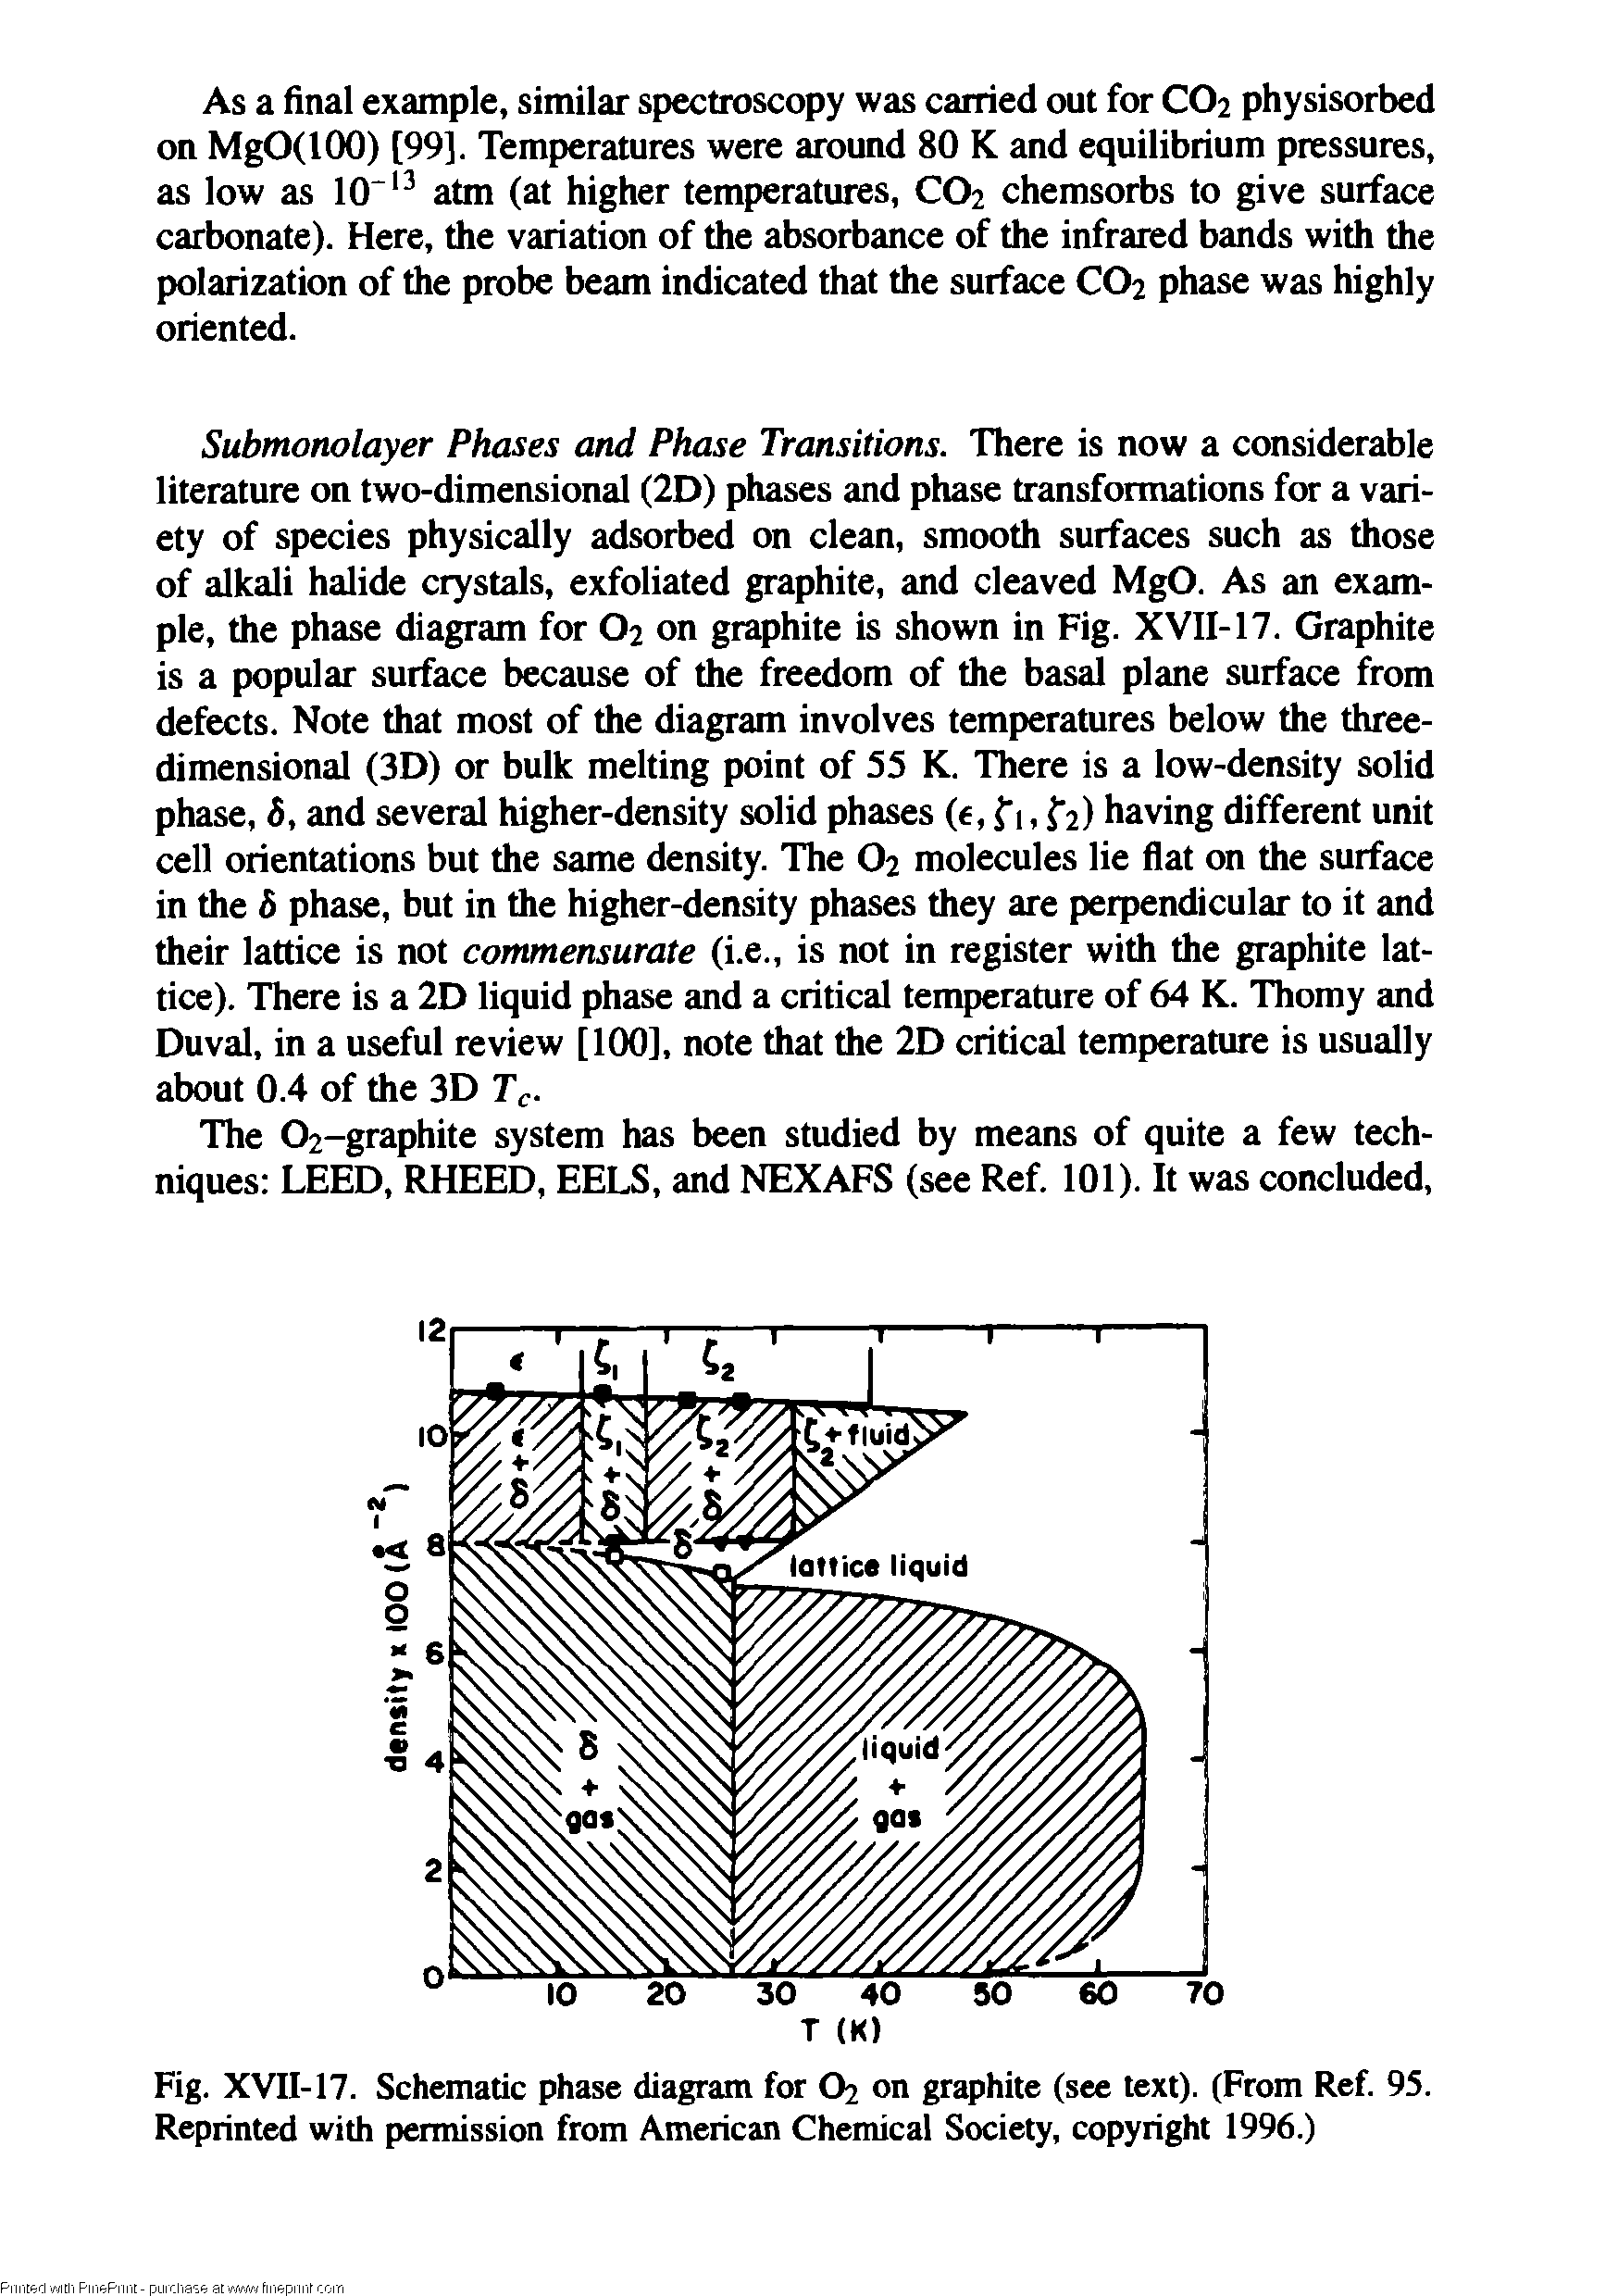 Fig. XVII-17. Schematic phase diagram for O2 on graphite (see text). (From Ref 95. Reprinted with permission from American Chemical Society, copyright 1996.)...